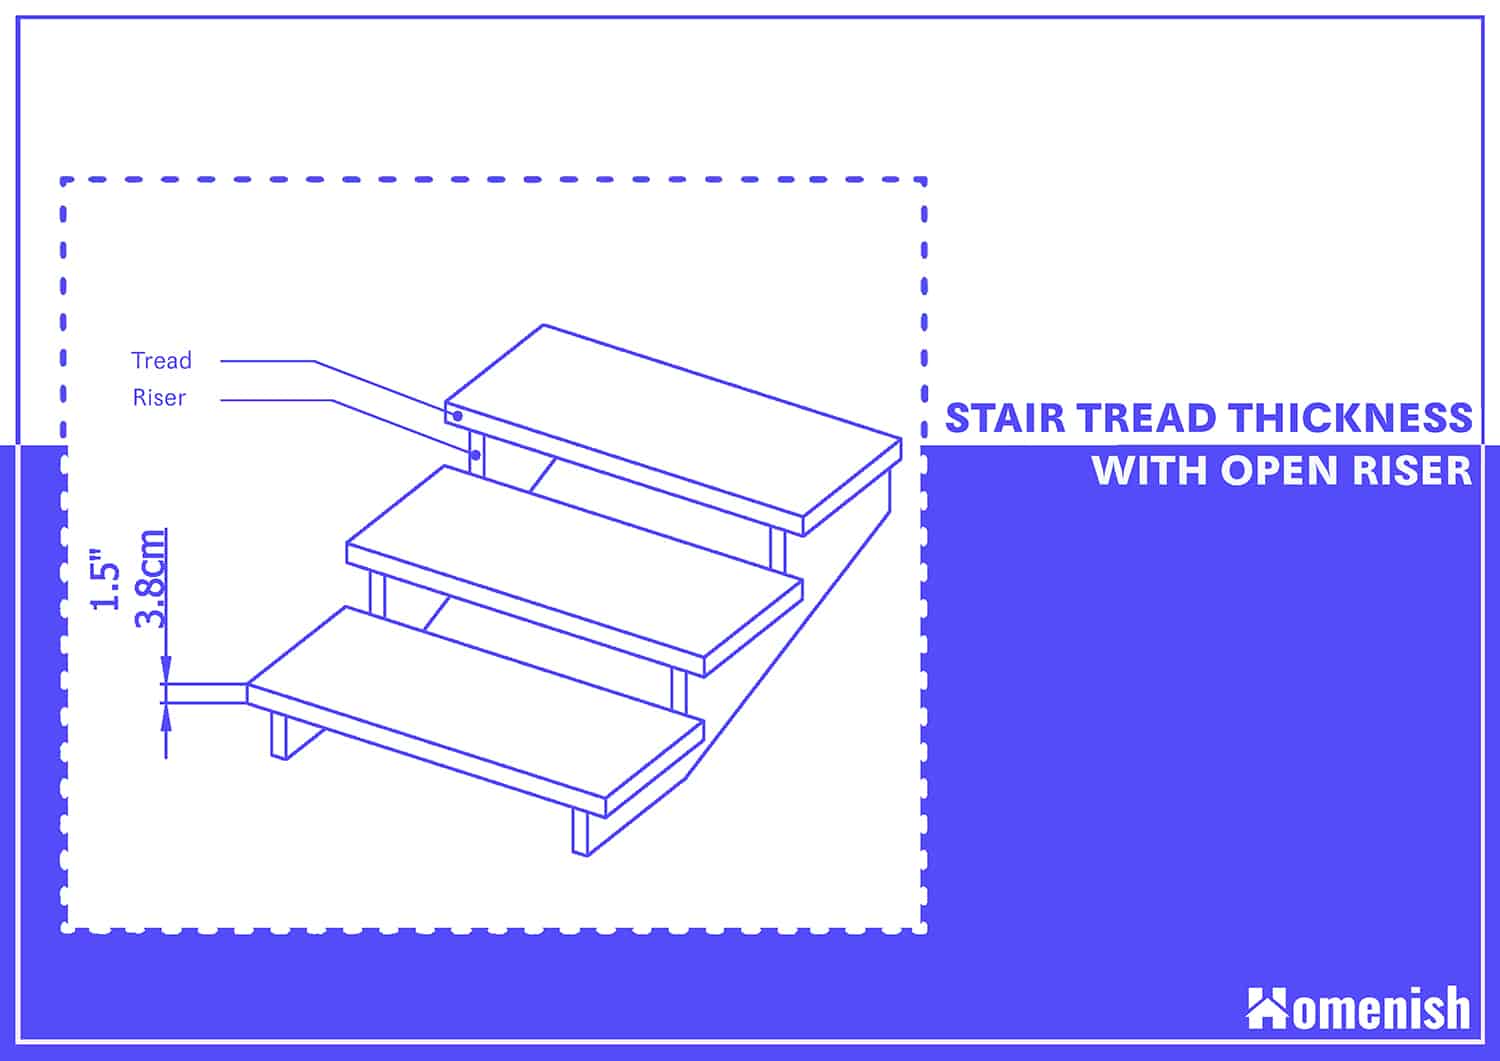 Standard Stair Tread Thickness with Open Riser